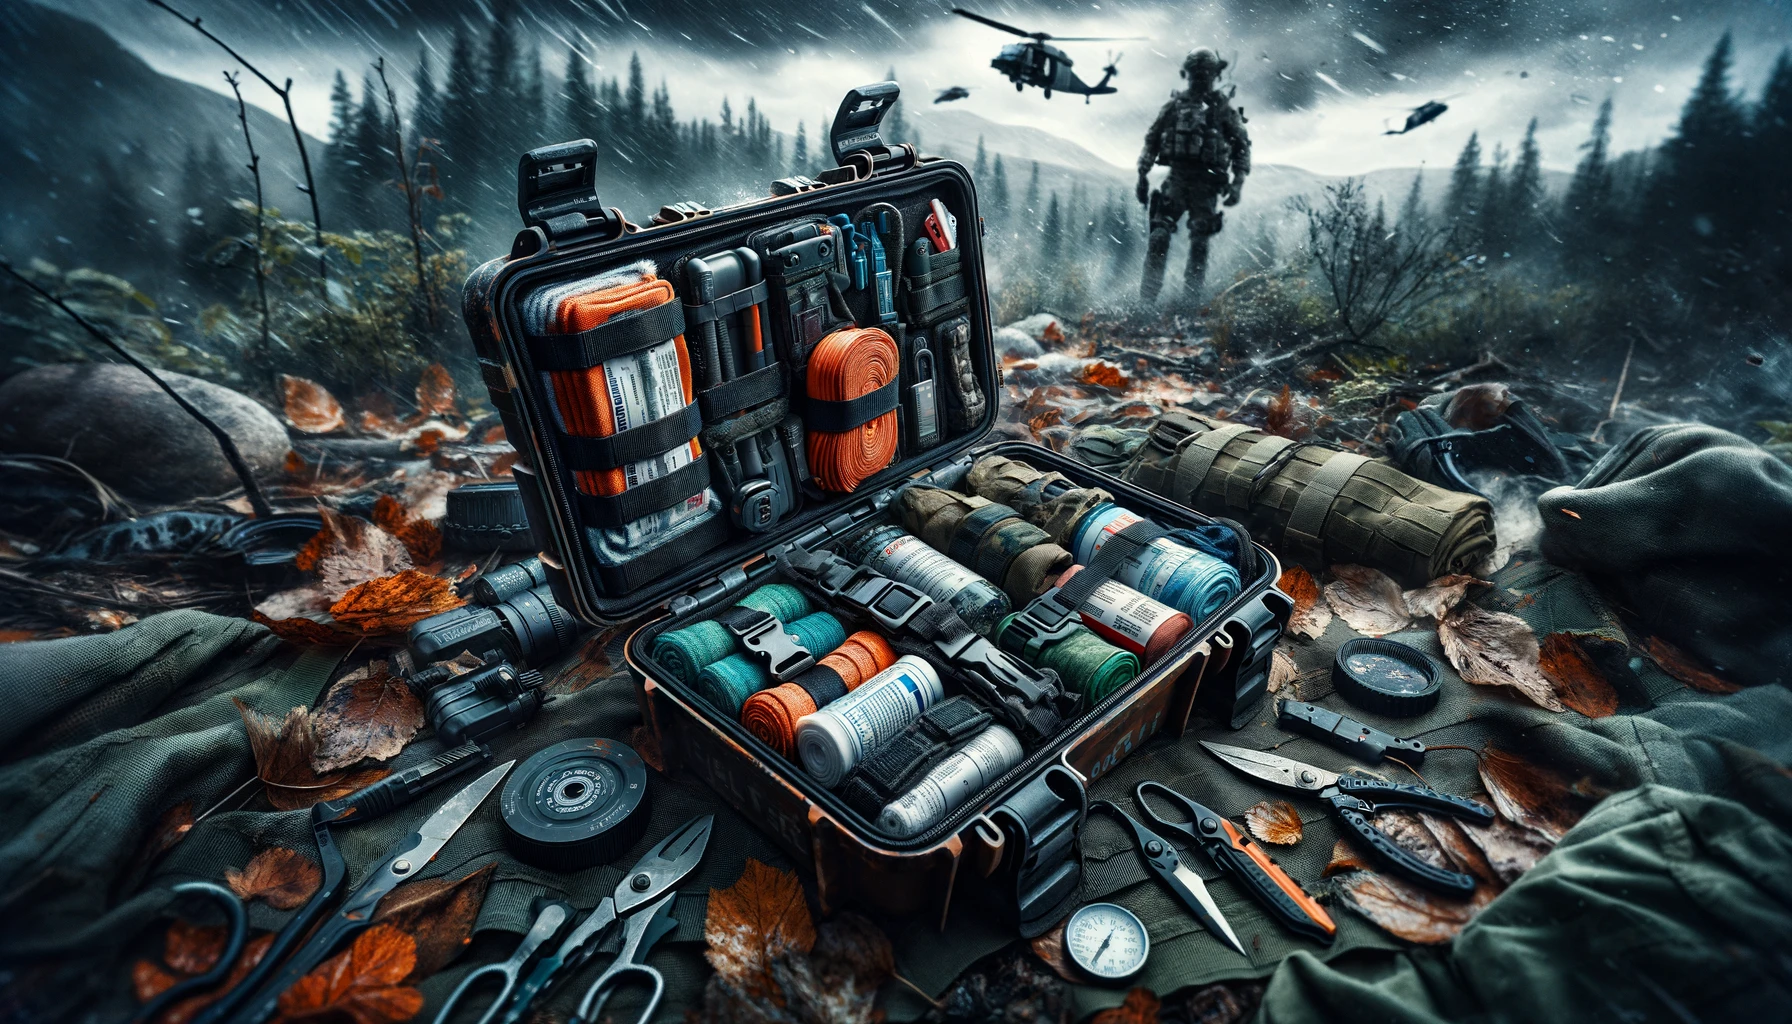 Dramatic depiction of a tactical trauma kit essentials laid out on wilderness terrain, including quick-clot bandages, chest seals, and a compact defibrillator, set against a backdrop of stormy skies and blurred motion, highlighting the urgency and importance of being prepared with specialized emergency supplies for severe injuries in survival situations